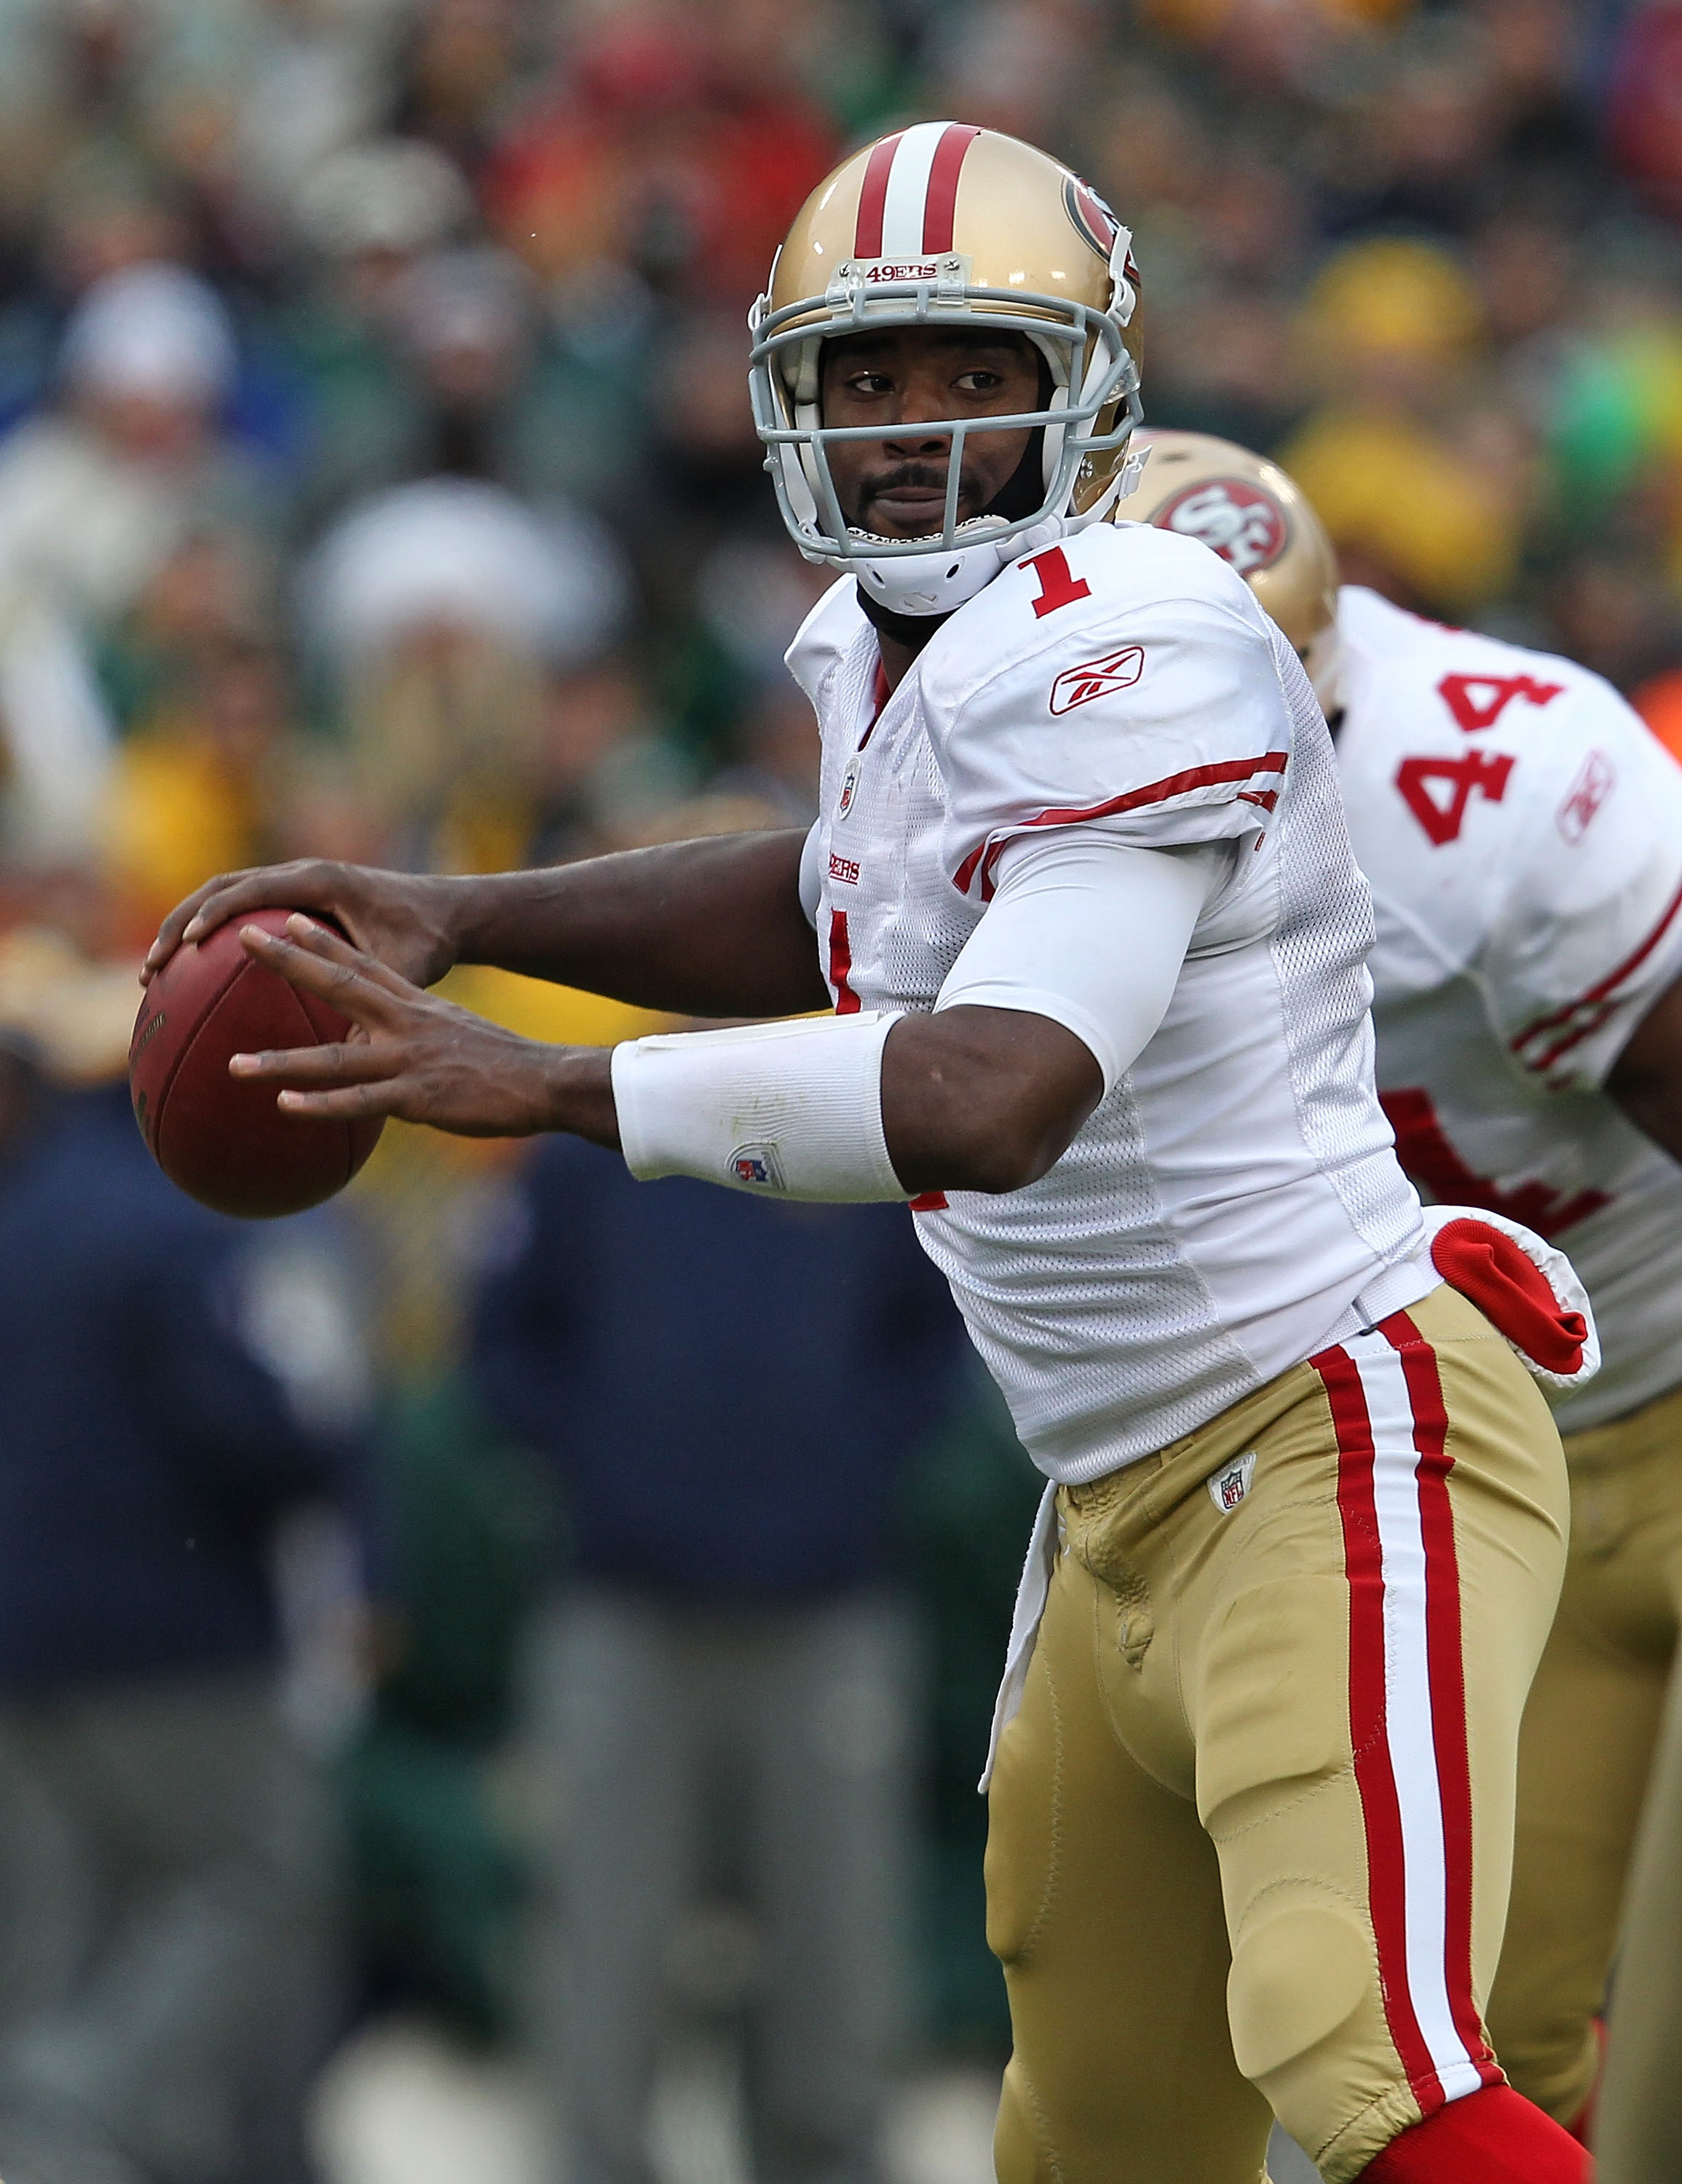 GREEN BAY, WI - DECEMBER 05: Troy Smith #1 of the San Francisco 49ers throws a pass against the Green Bay Packers at Lambeau Field on December 5, 2010 in Green Bay, Wisconsin. The Packers defeated the 49ers 34-16. (Photo by Jonathan Daniel/Getty Images)